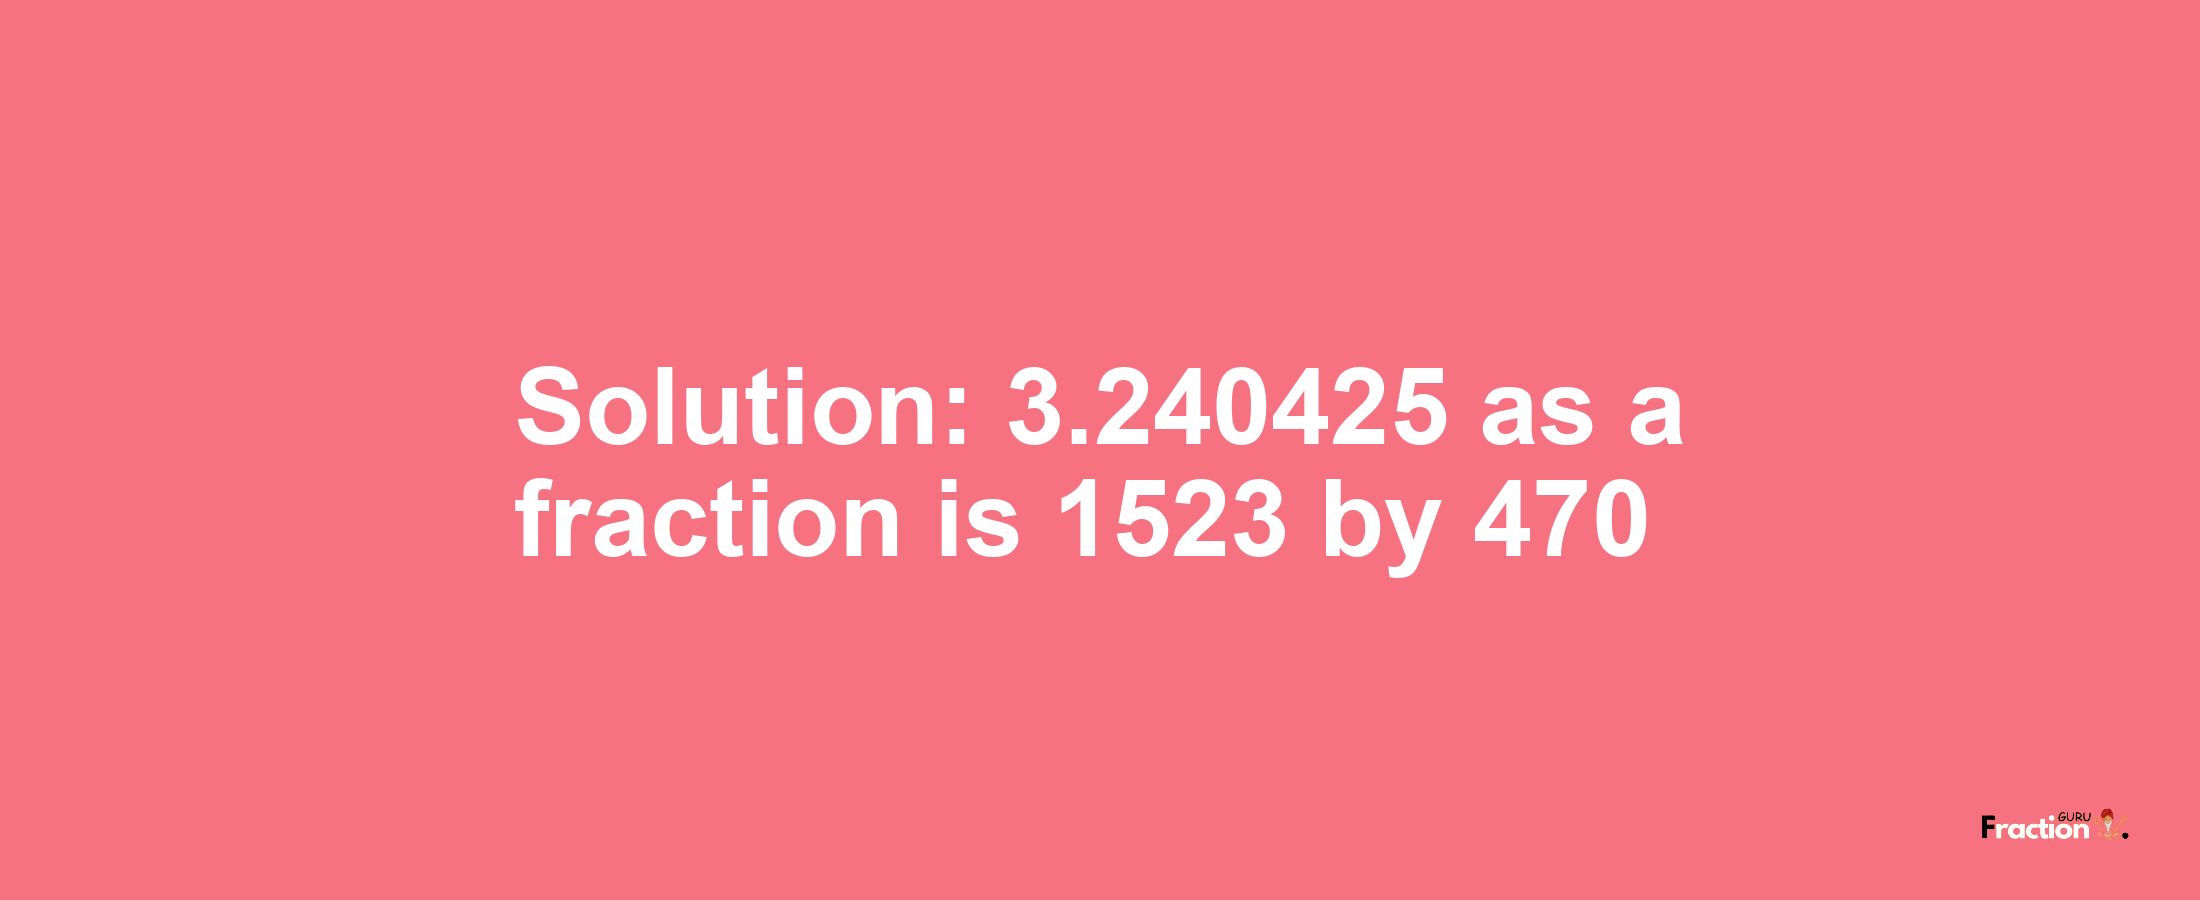 Solution:3.240425 as a fraction is 1523/470